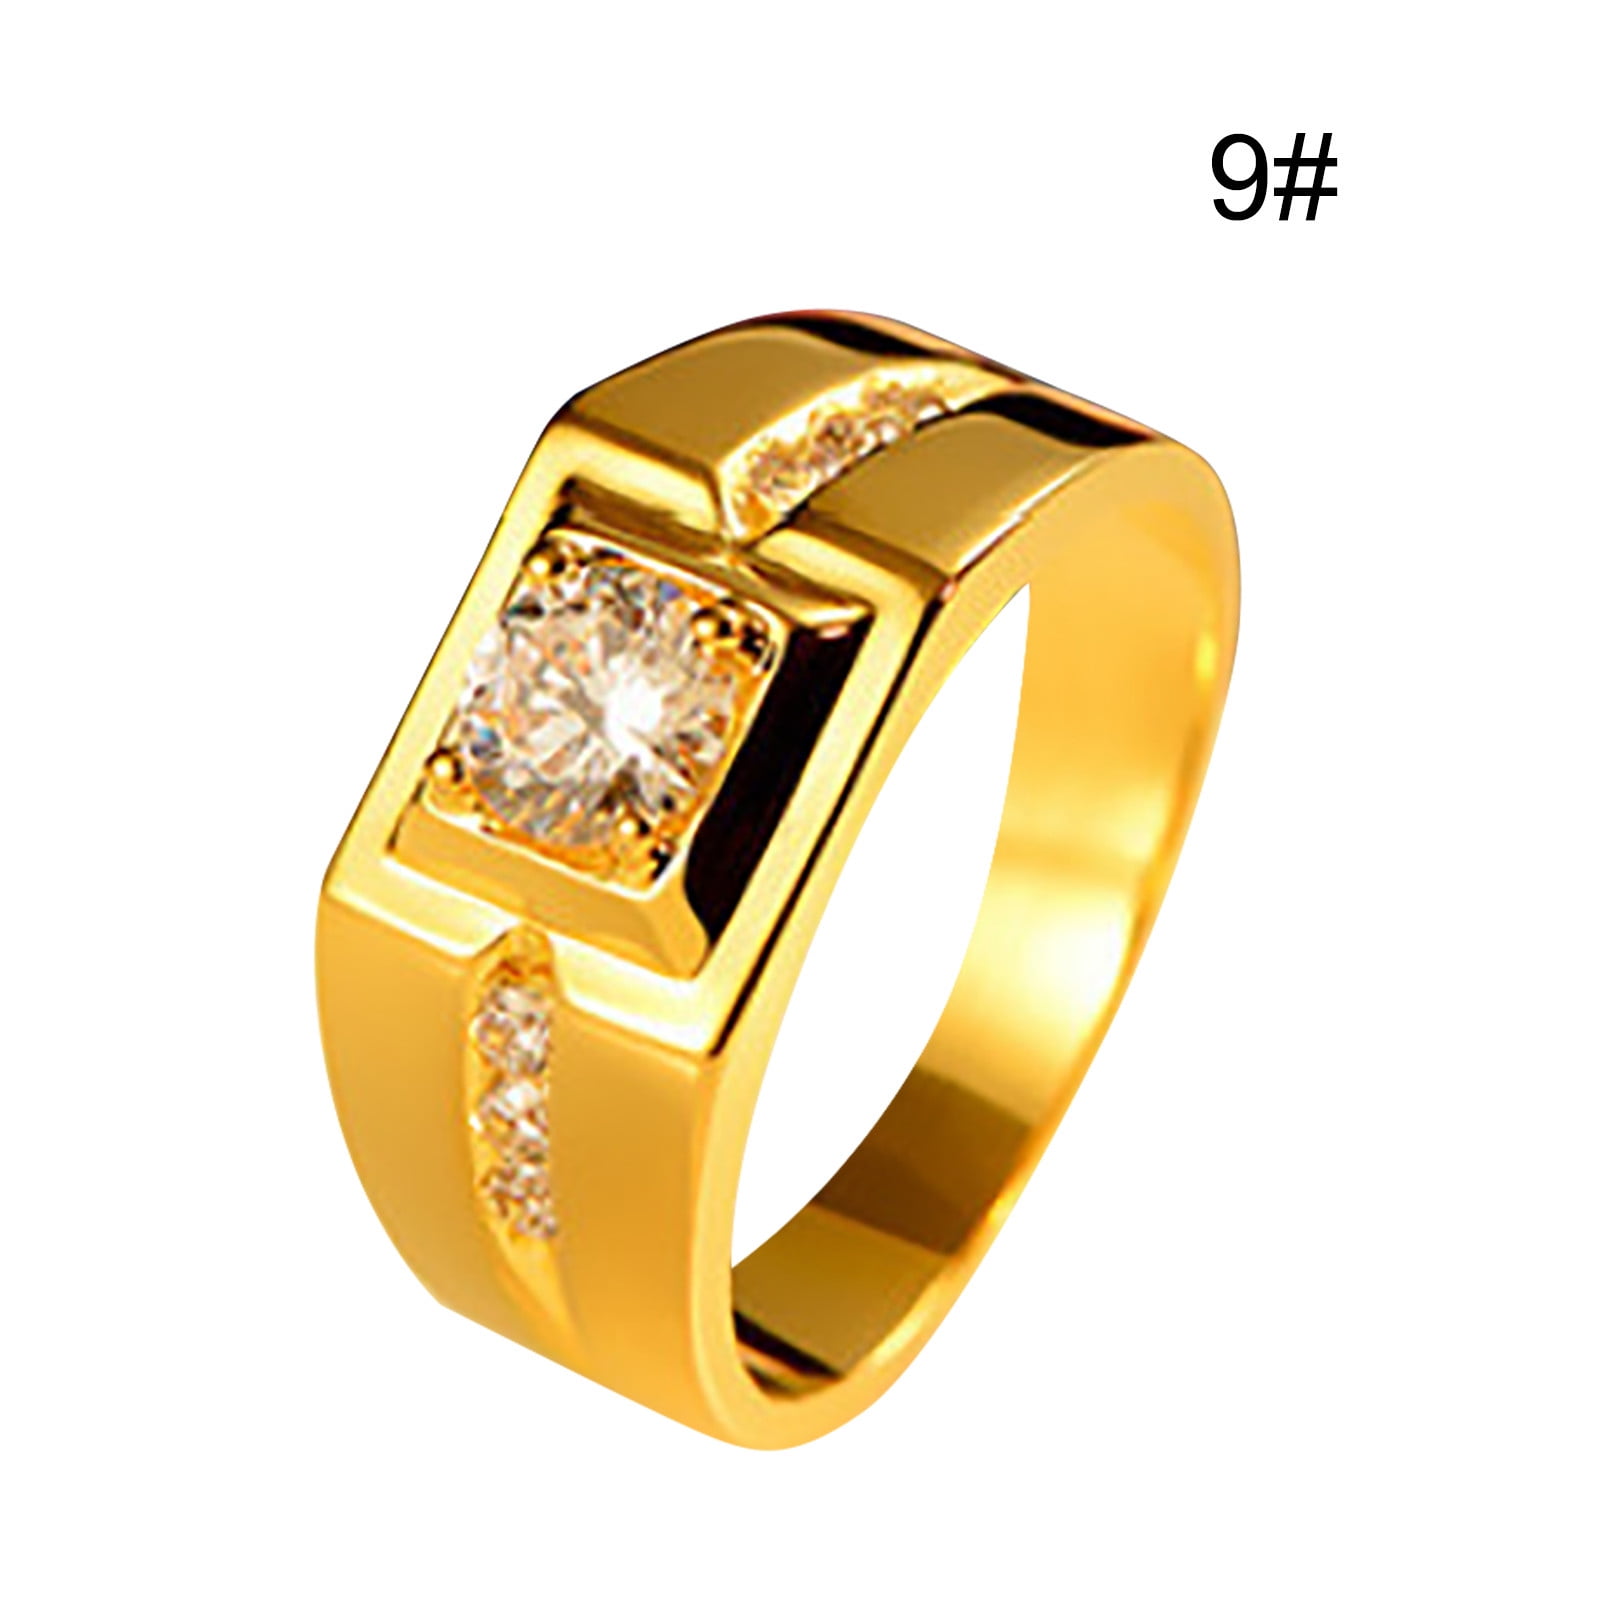 Buy quality Dual Design Band Engagement Ring for Men by Royale Diamonds in  Pune